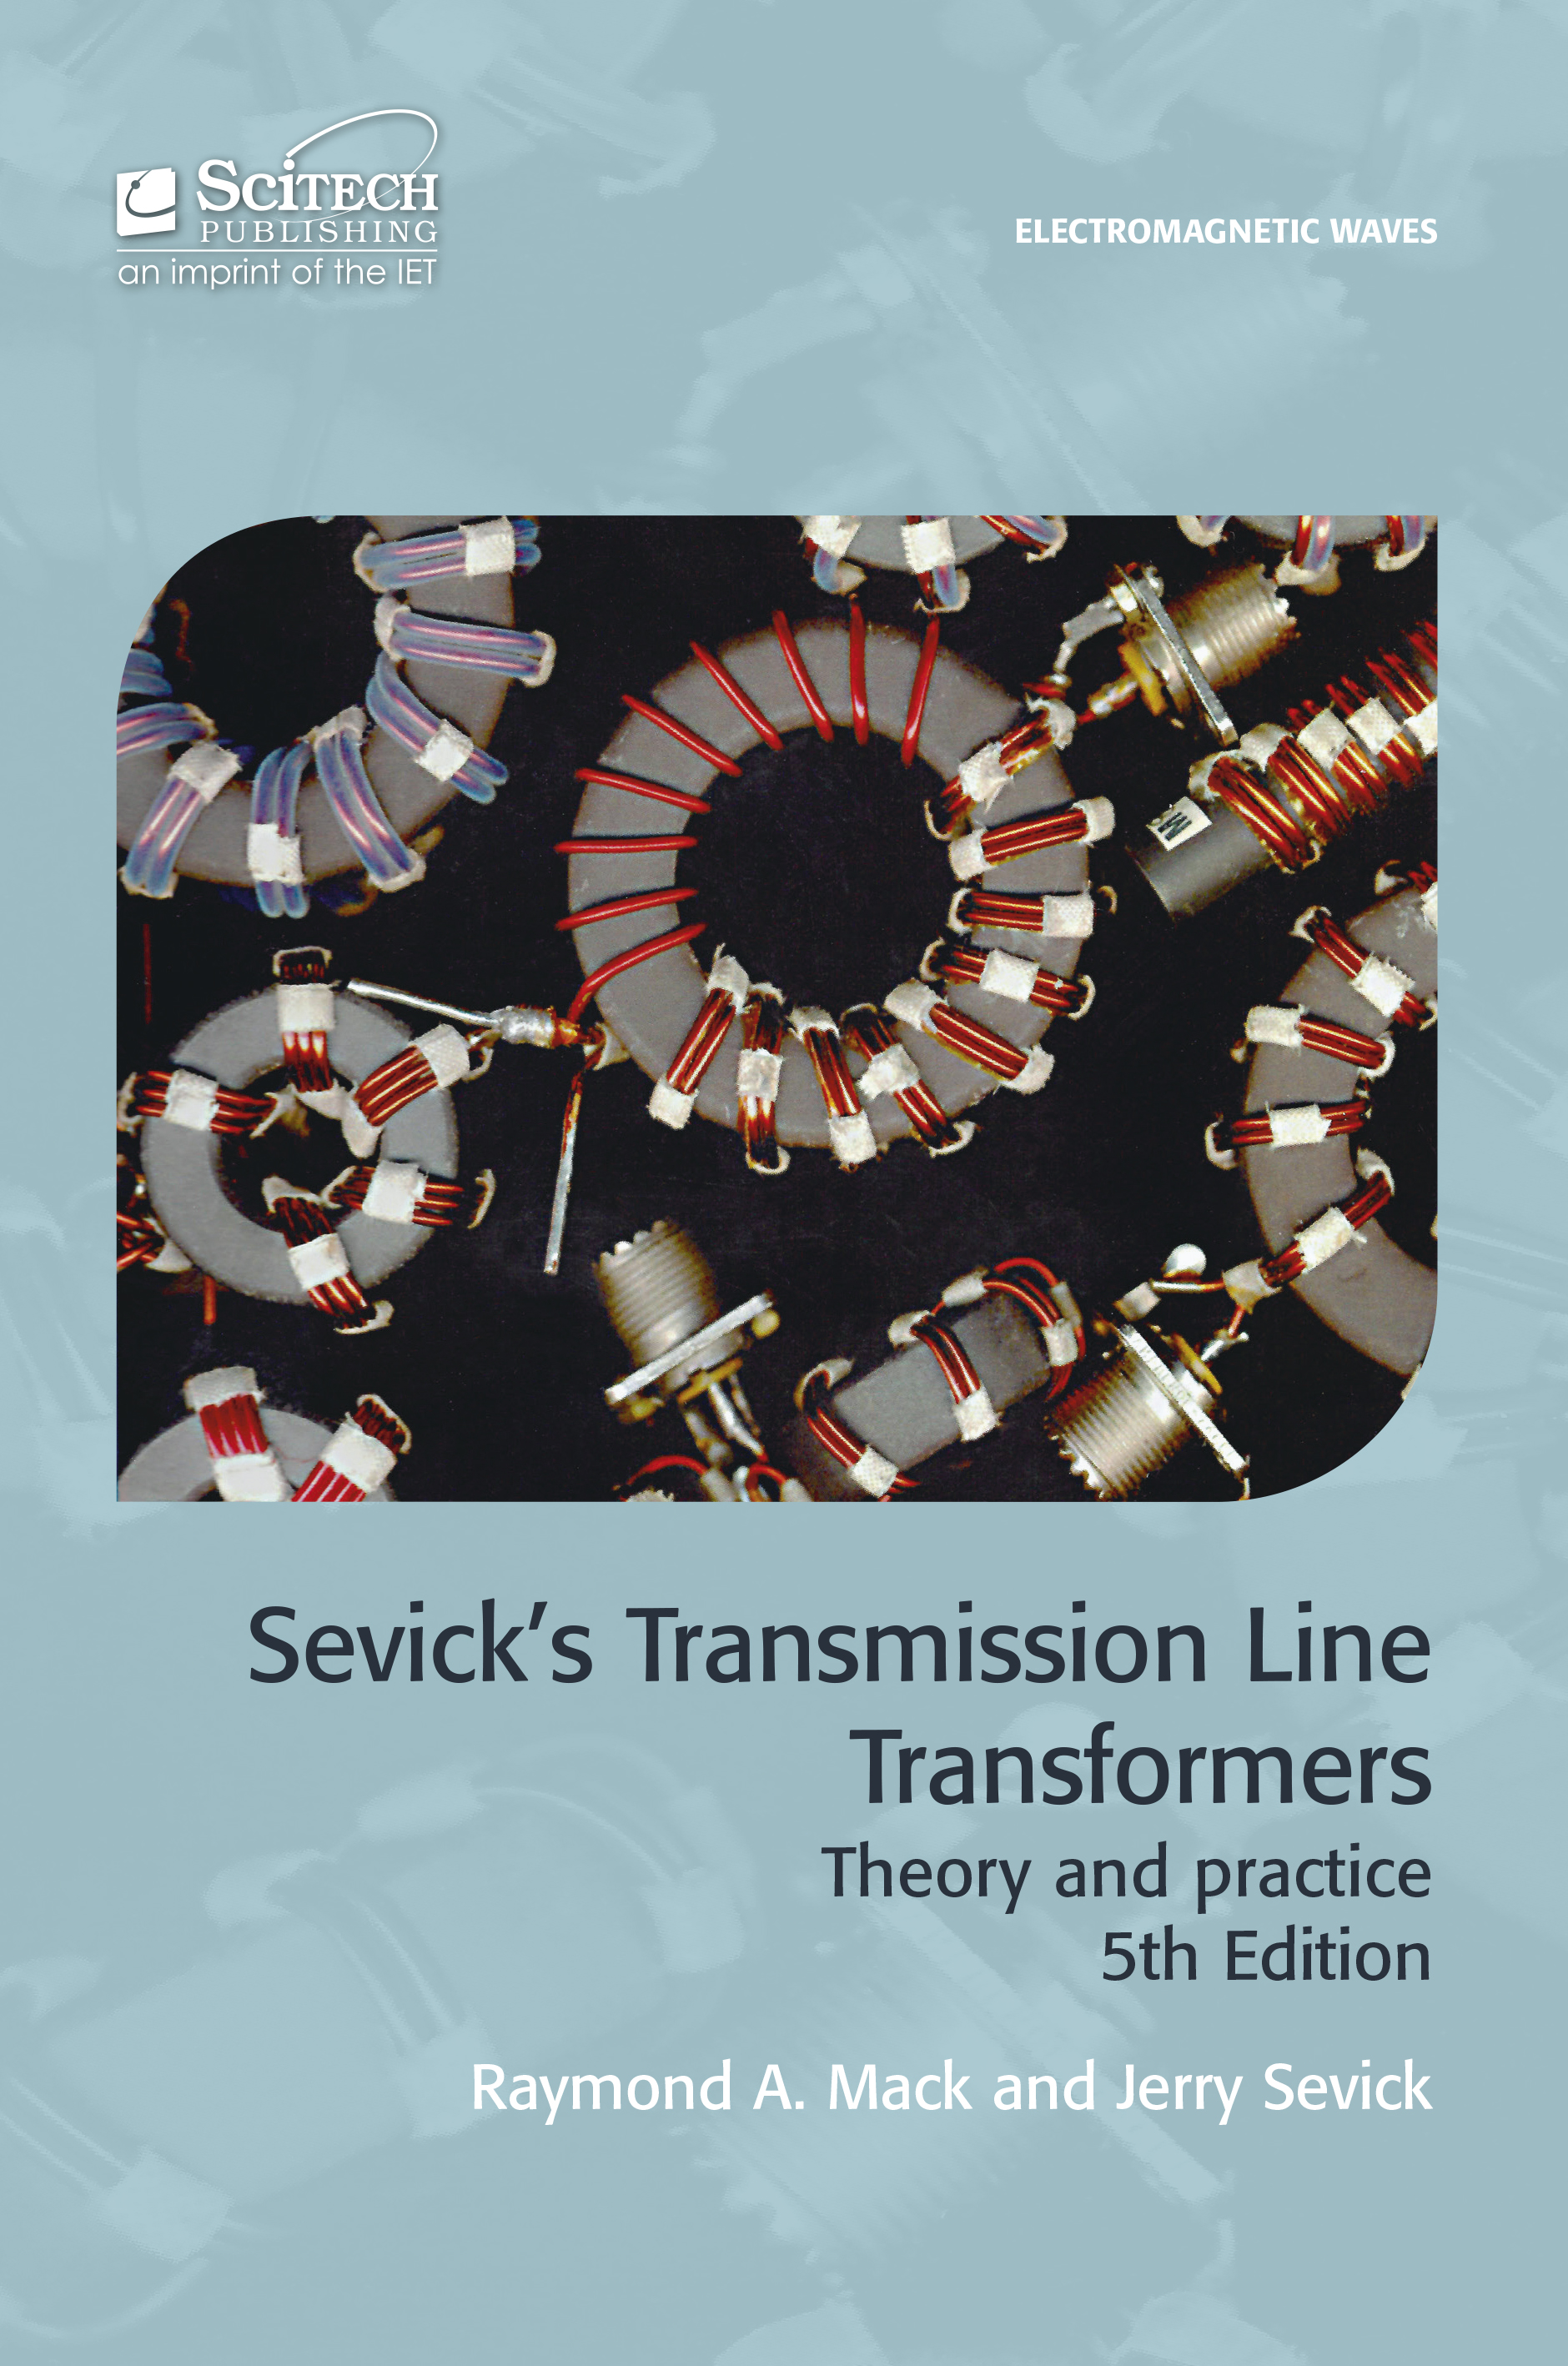 Sevick's Transmission Line Transformers, Theory and practice, 5th Edition